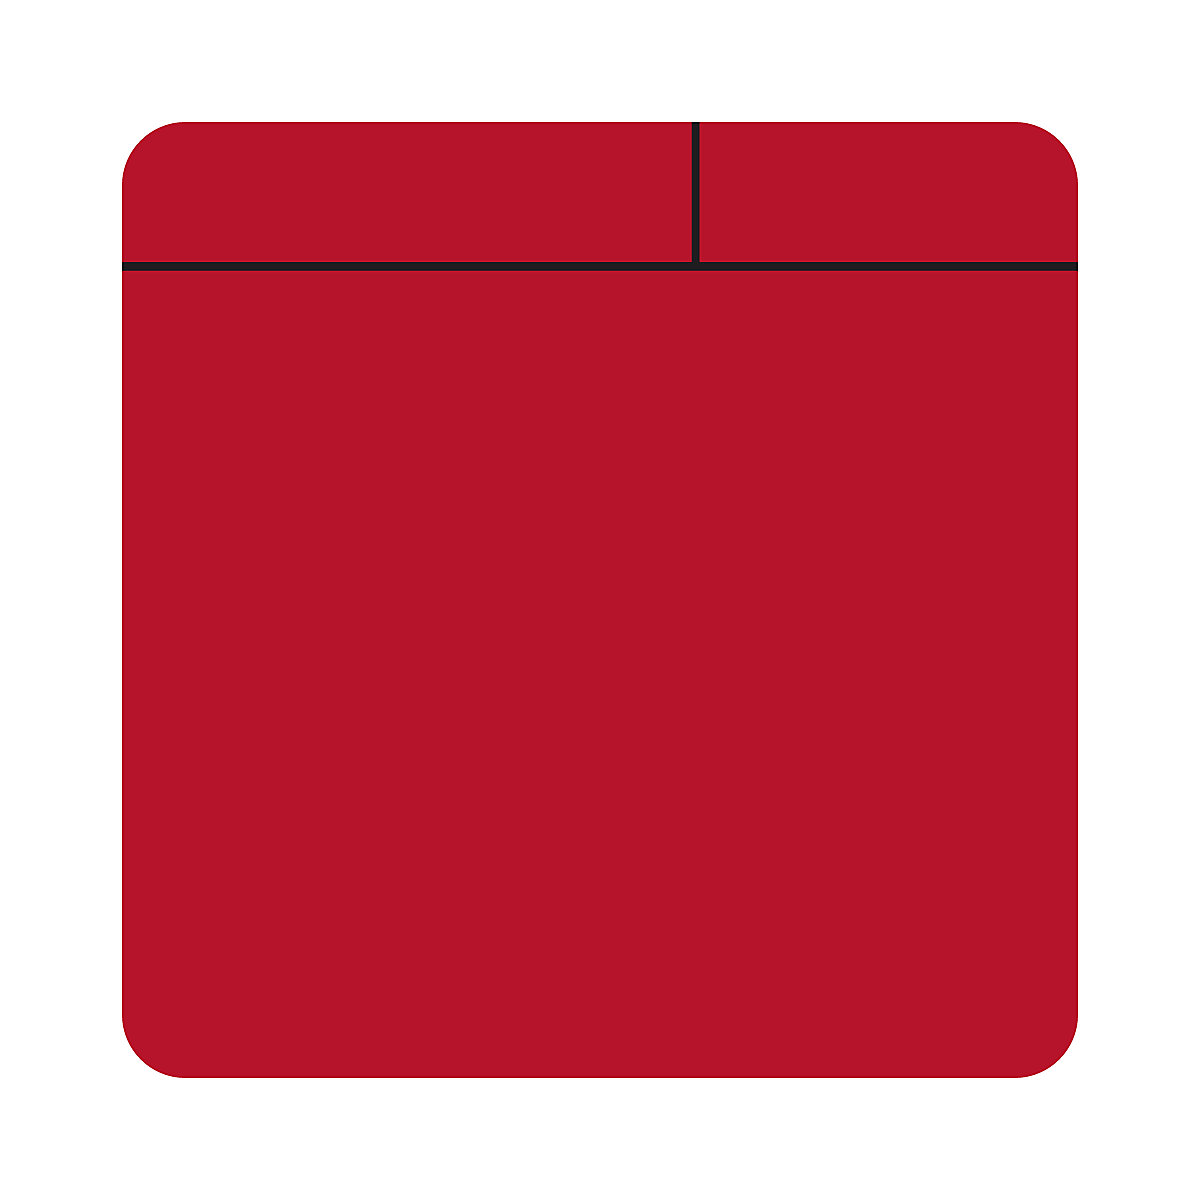 Post-it notes, magnetic, LxW 100 x 100 mm, pack of 10, red-6